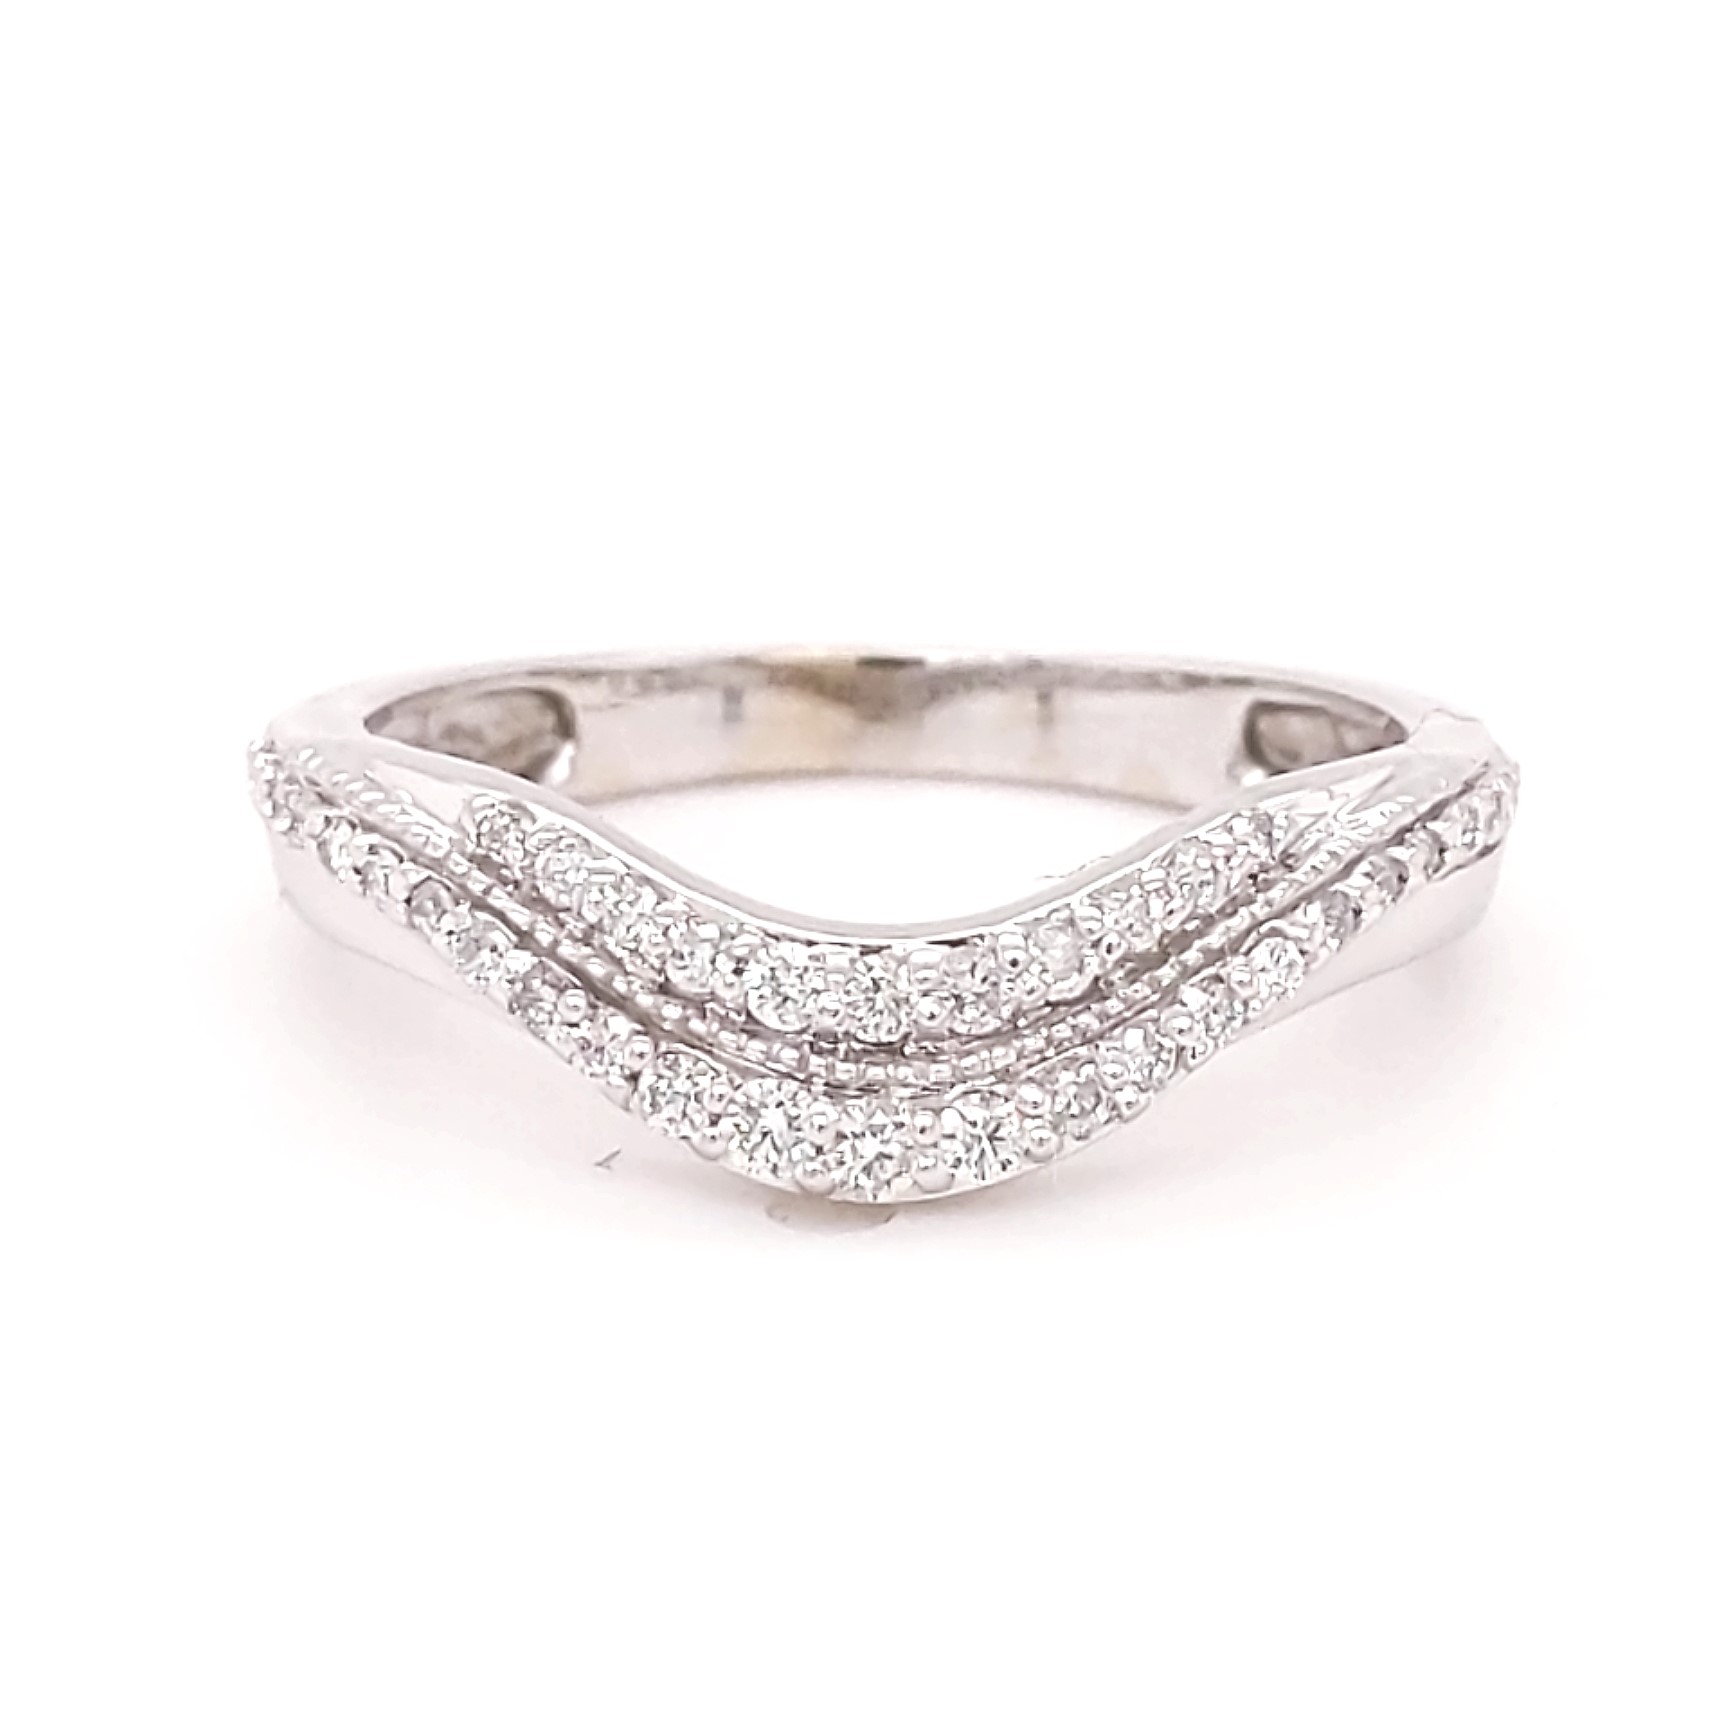 14K White Gold .25ctw RBC Diamond double-row bump band finger size 6 (we have 2 rings matching, $985/each)